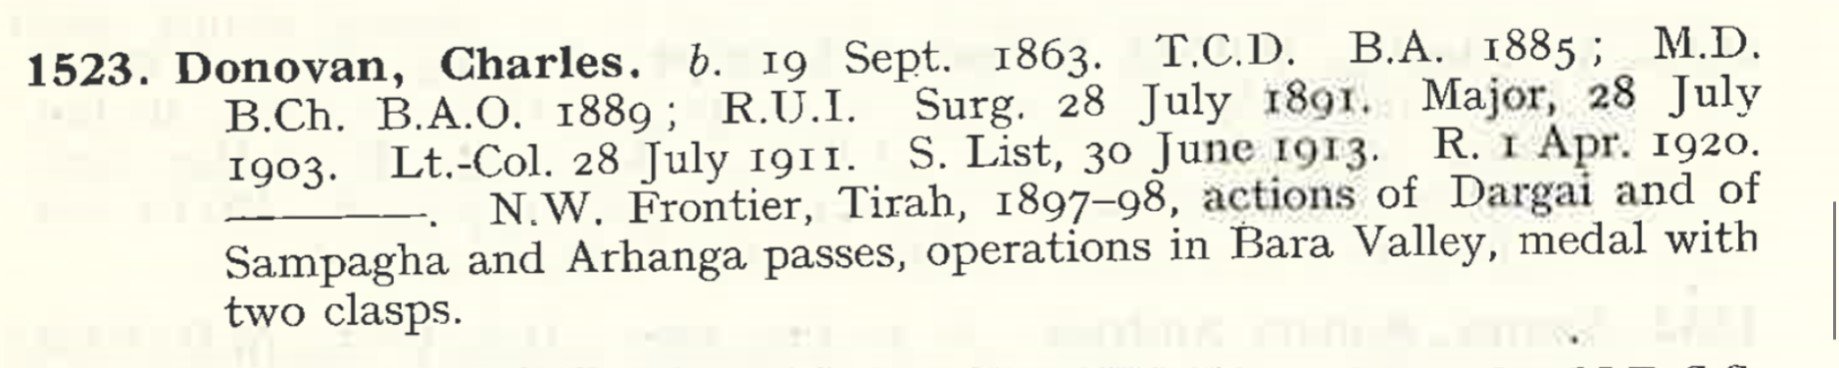 Excerpt from the Indian Medical Service roll, summarising Donovan’s career, with his education in Cork, training in Dublin, and subsequent work in the medical service